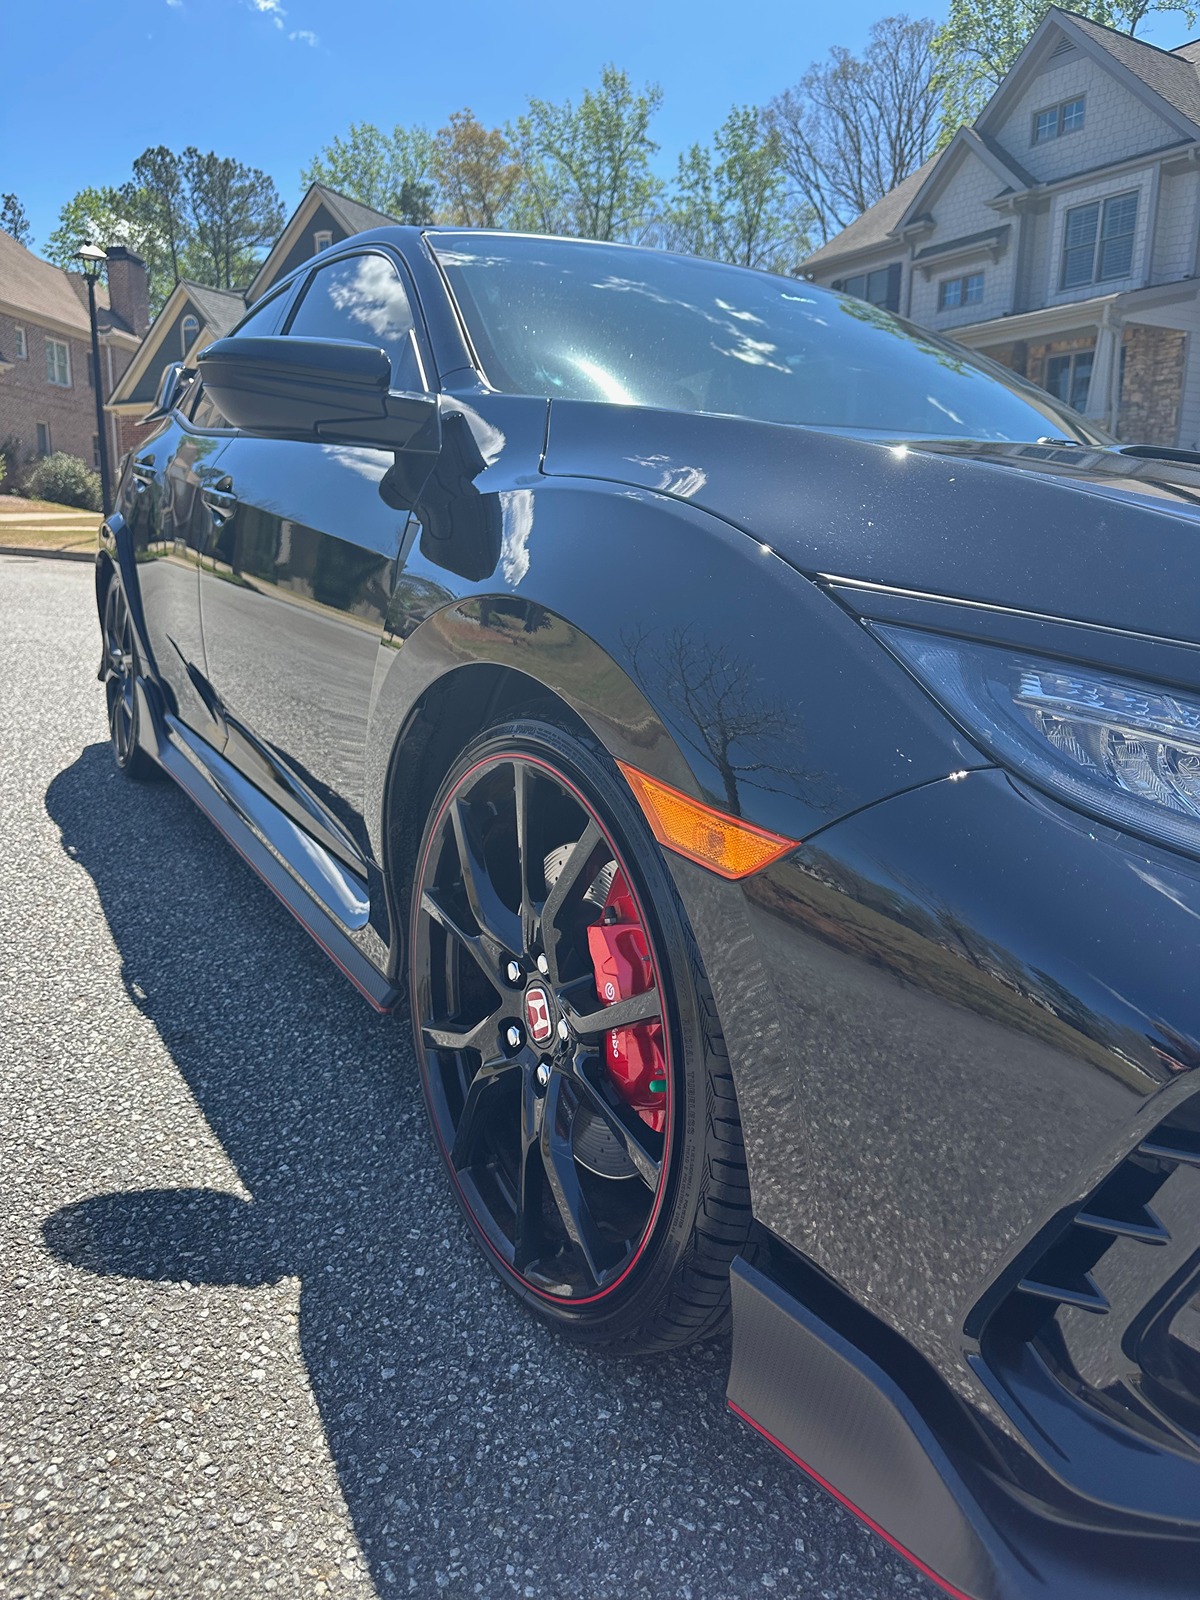 Honda Civic 10th gen Sold. 2019 Civic Type R for sale IMG_8126